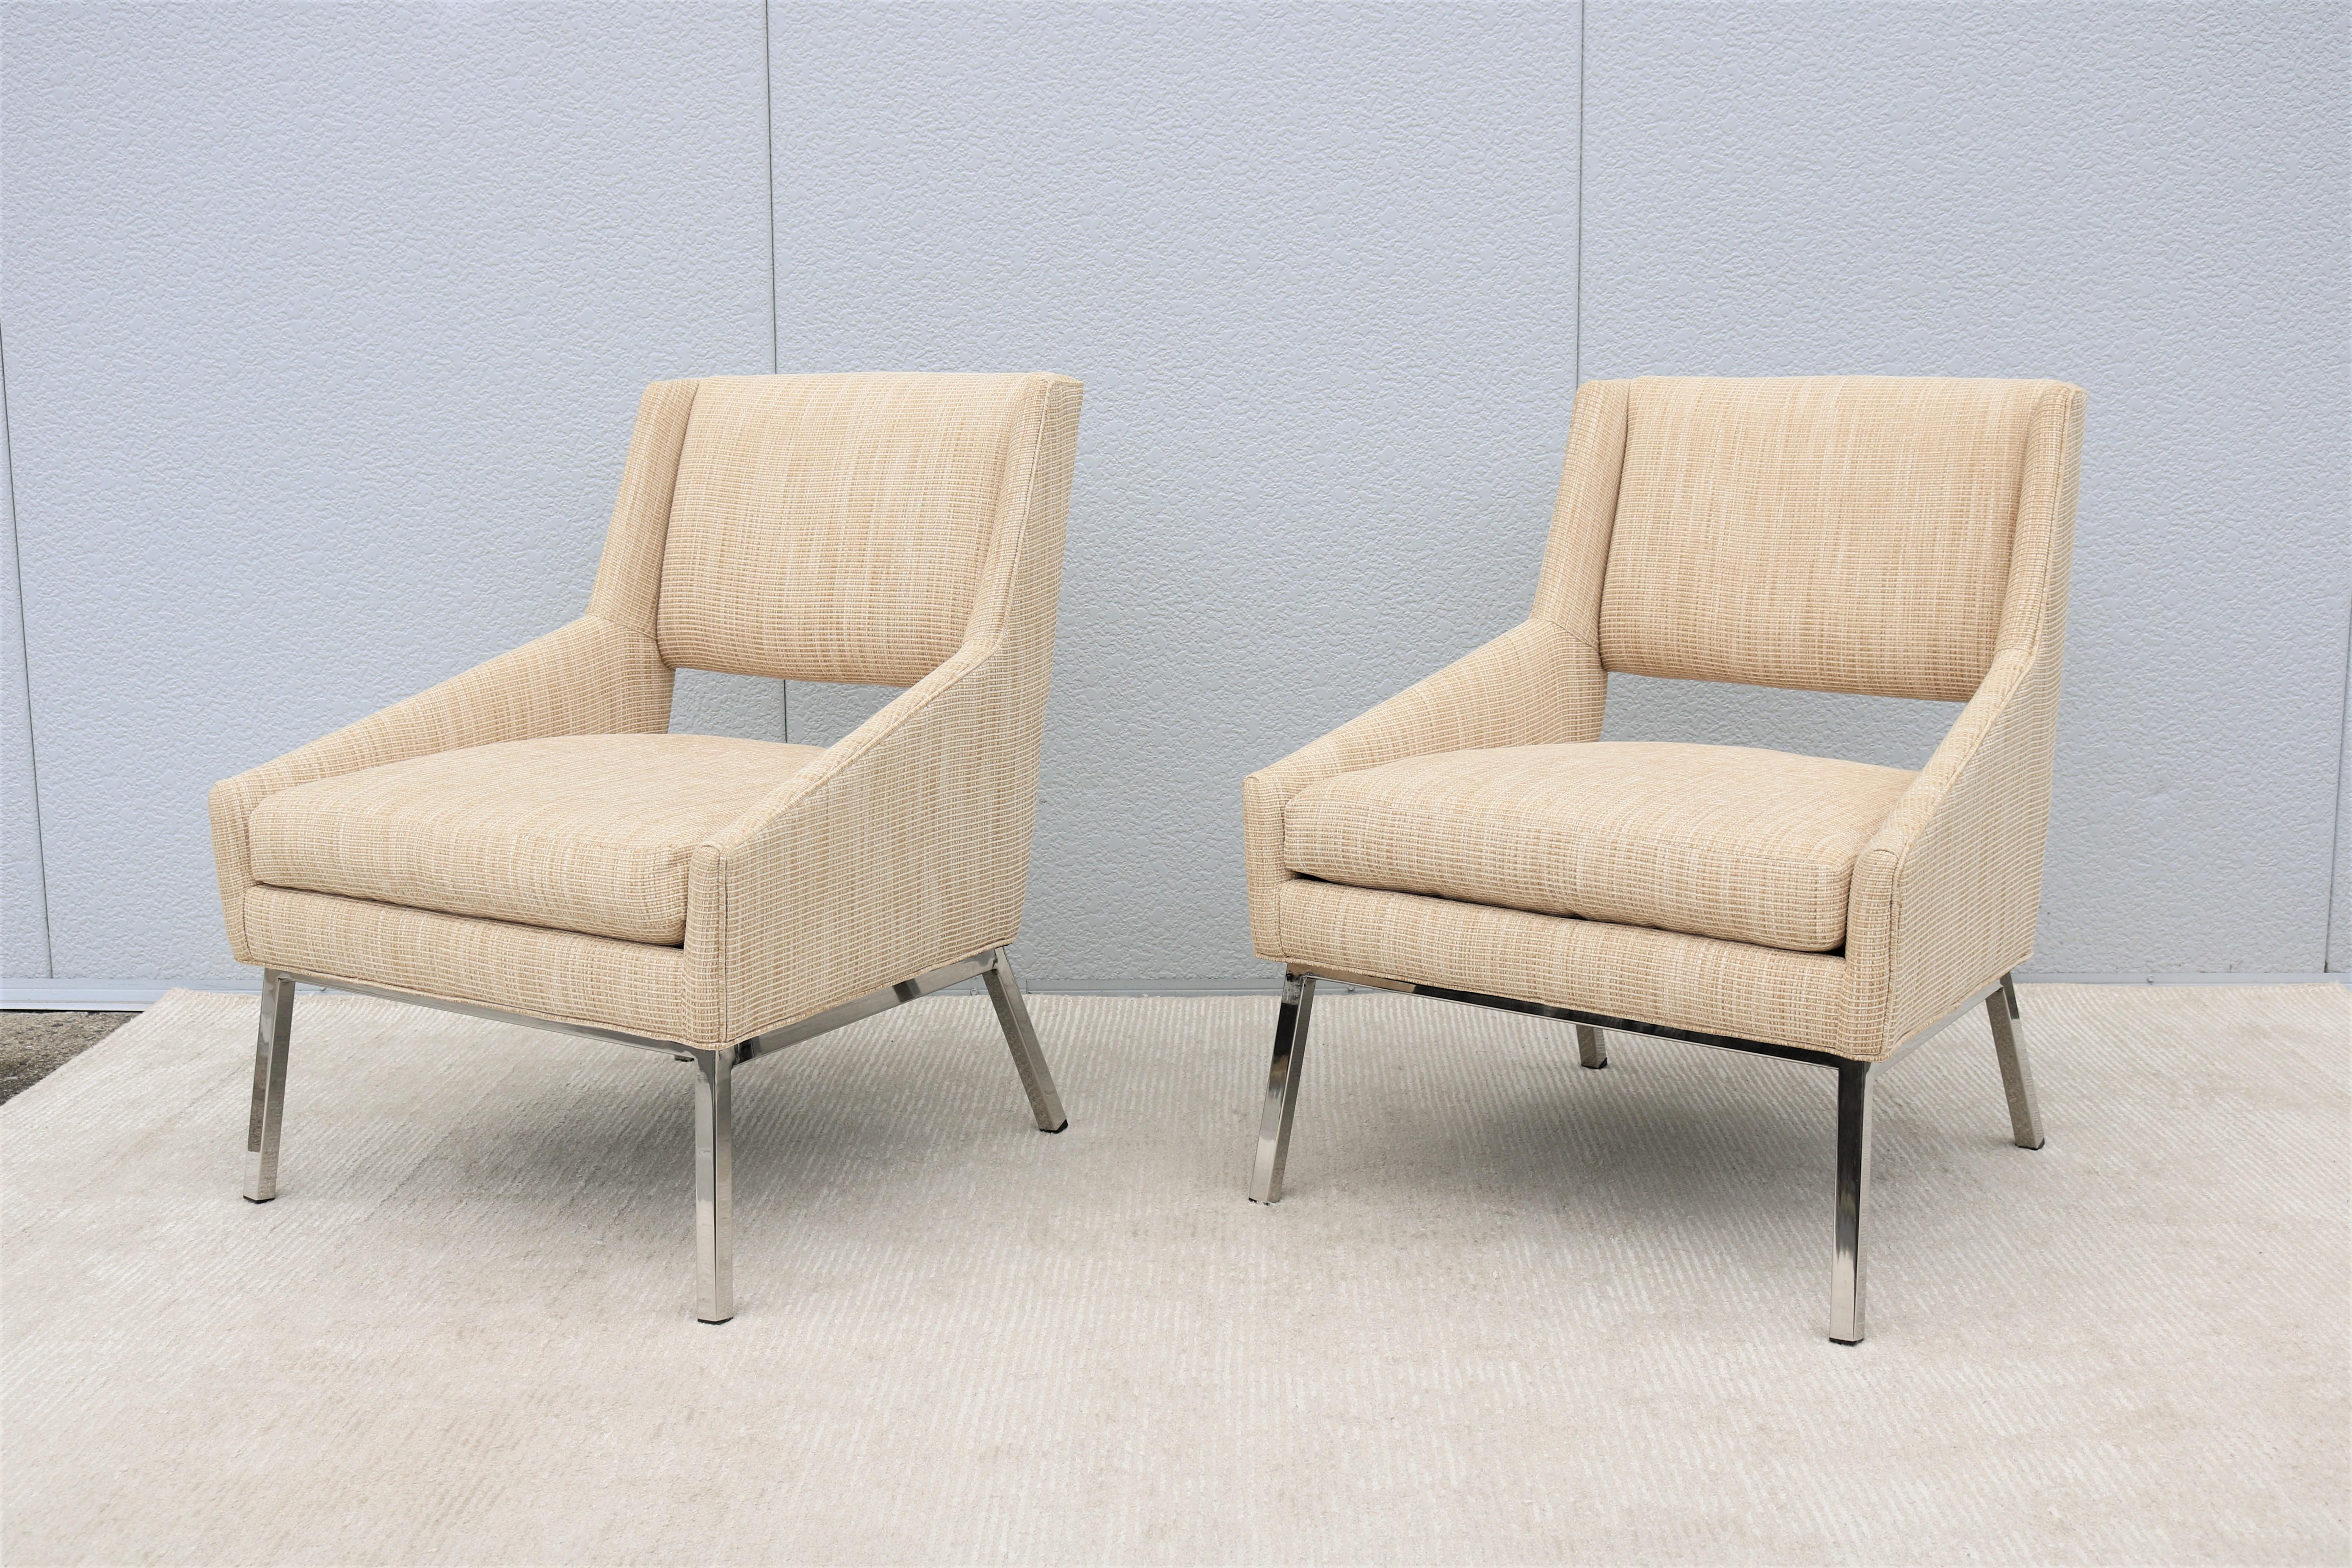 American Mid-Century Modern Style Lexington Amani Beige Fabric Accent Chairs, a Pair For Sale